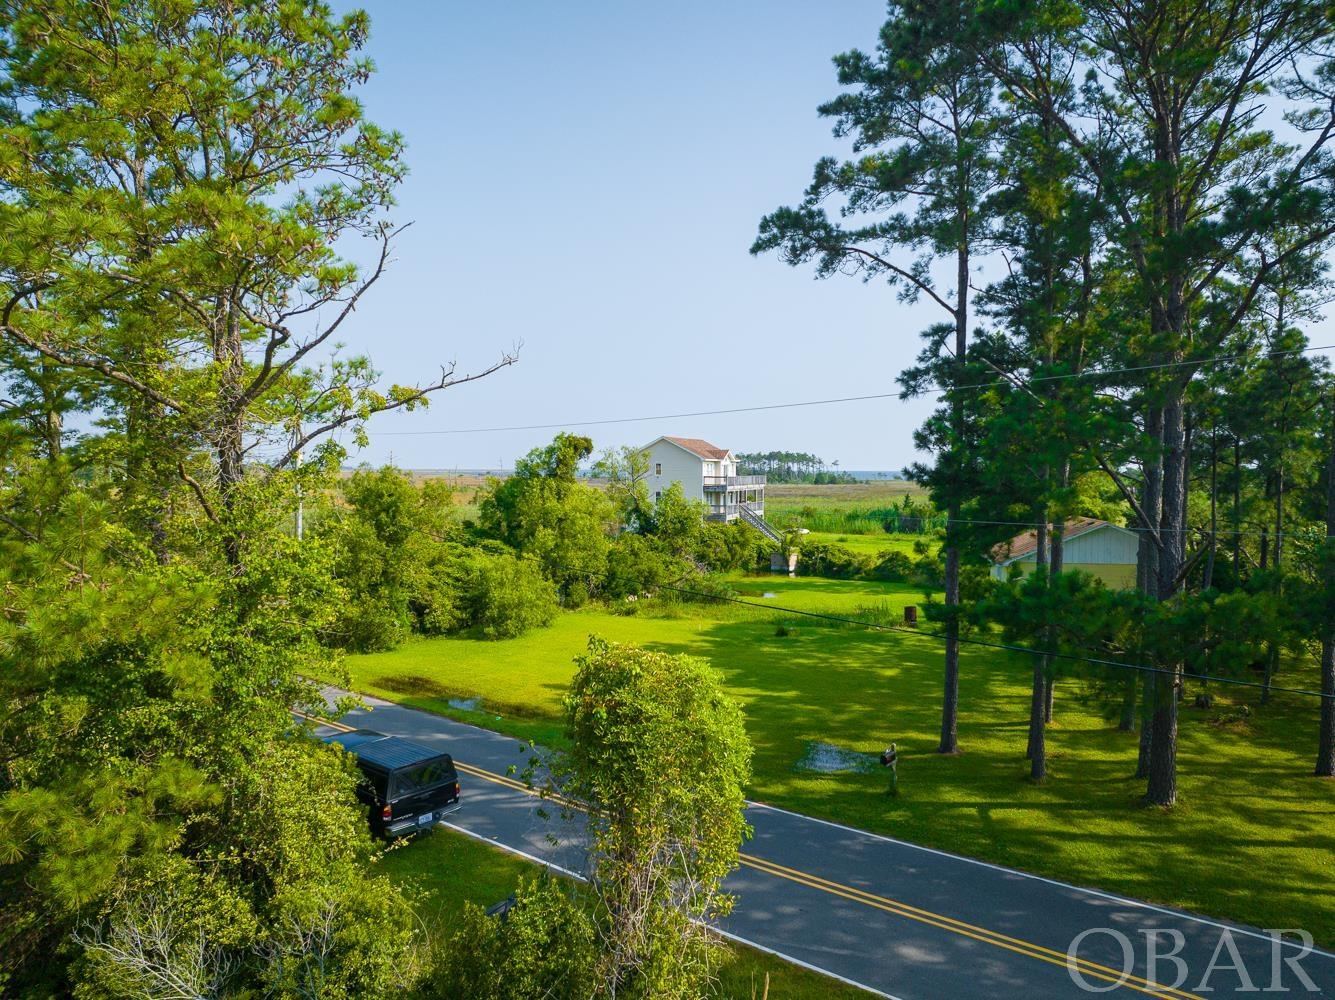 17 Mashoes Road, Manns Harbor, NC 27953, 2 Bedrooms Bedrooms, ,2 BathroomsBathrooms,Residential,For sale,Mashoes Road,122668